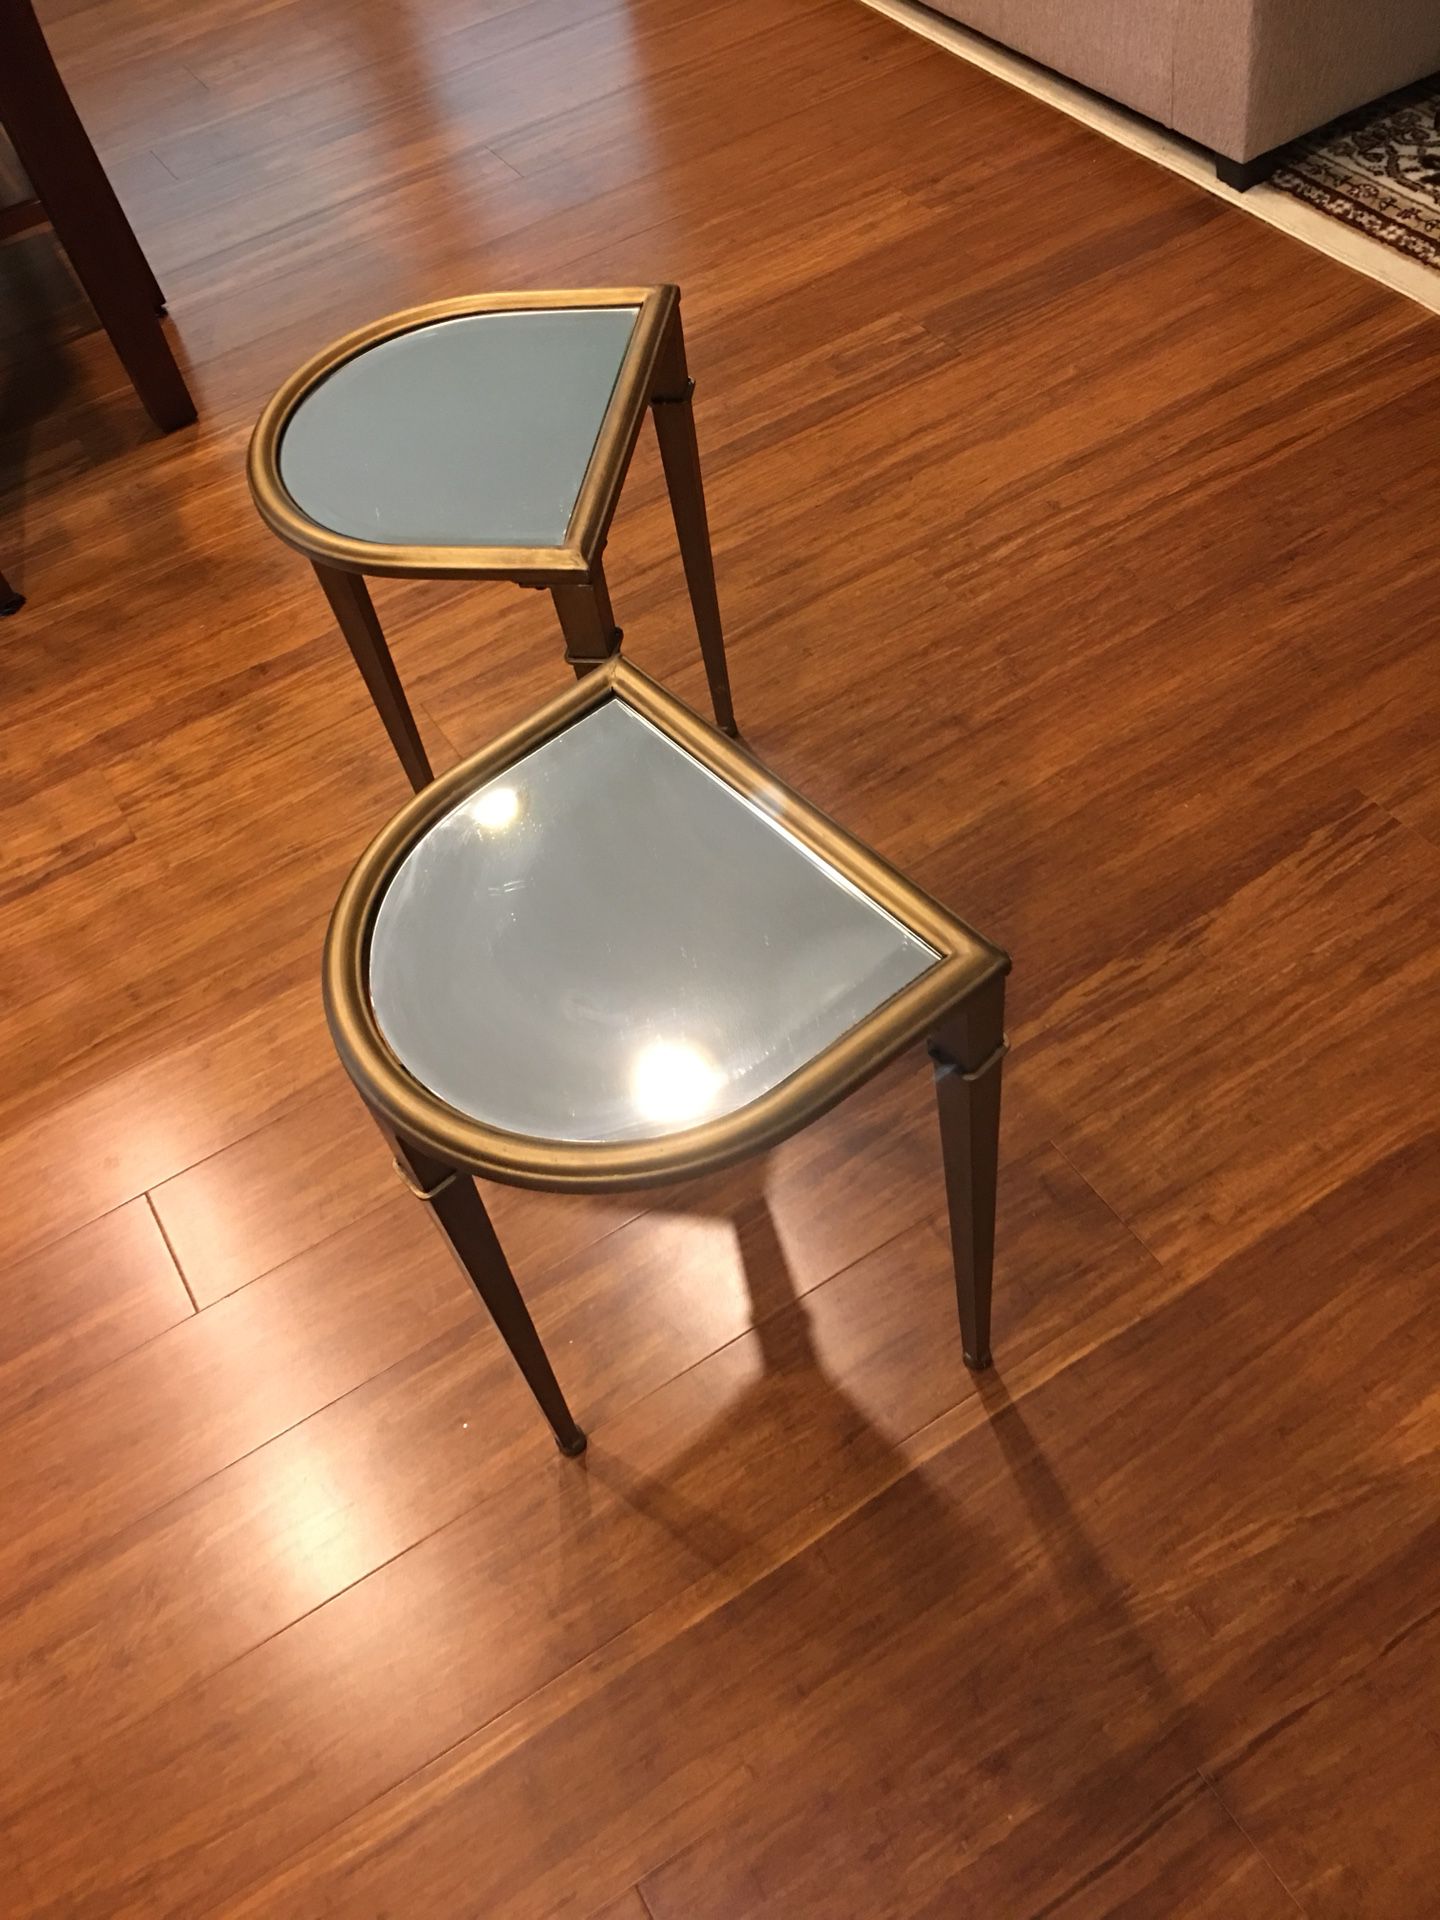 Two side tables with glass inserts